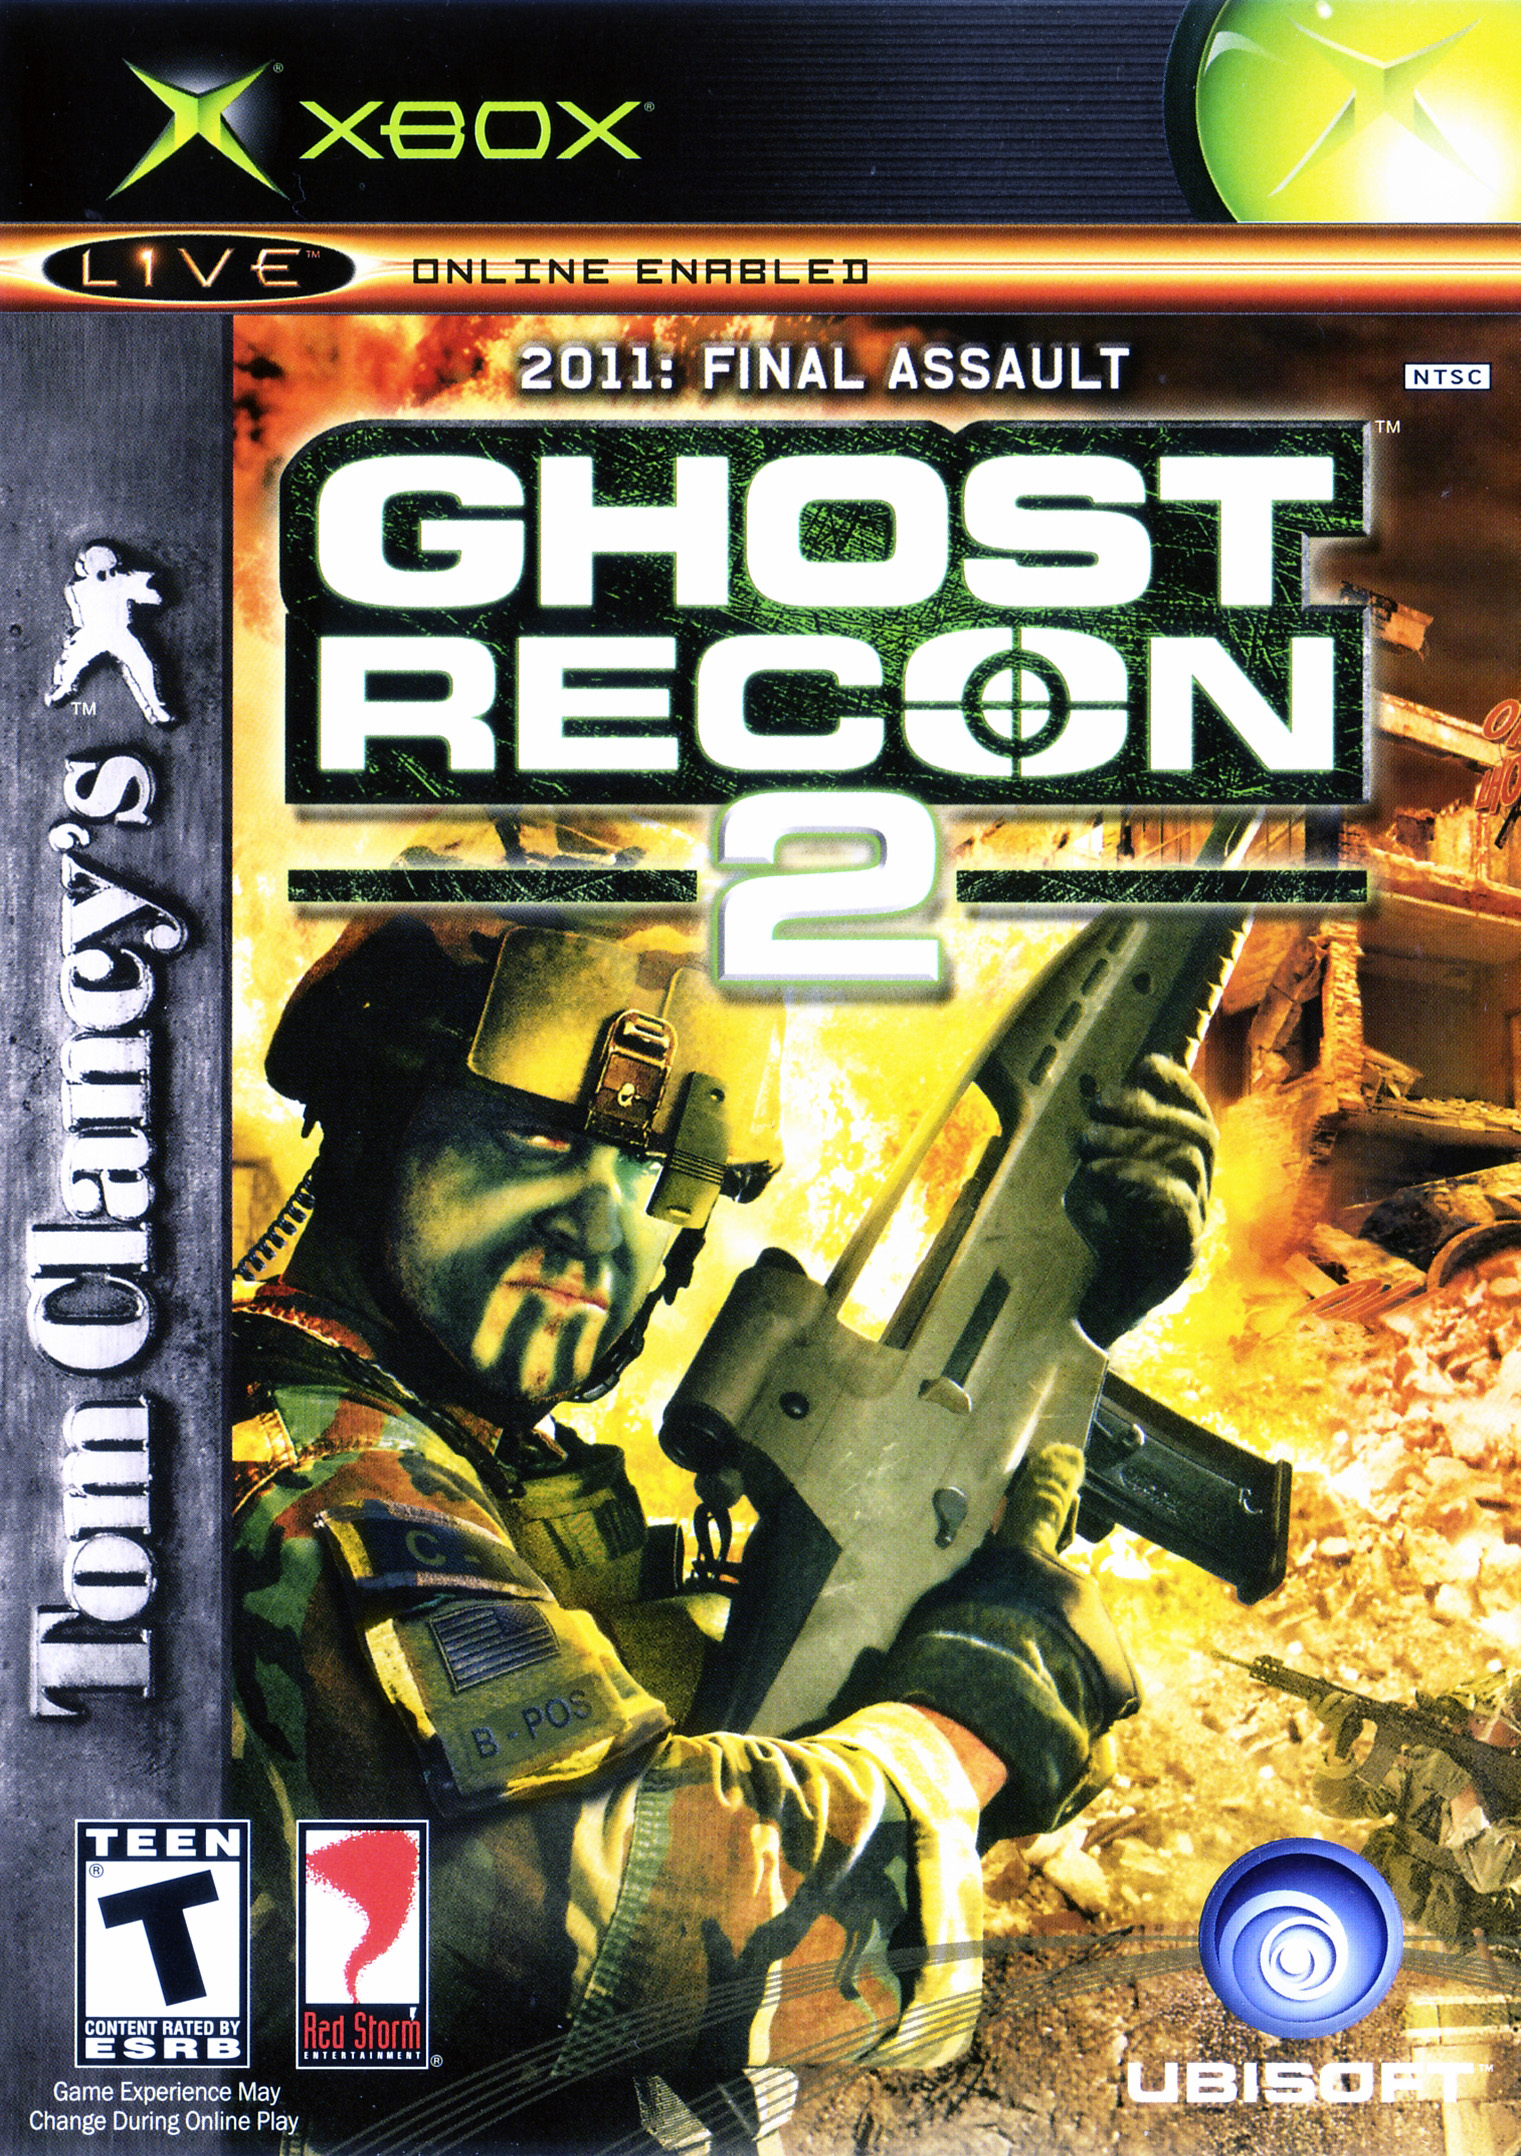 Tom Clancy's Ghost Recon 2/Xbox